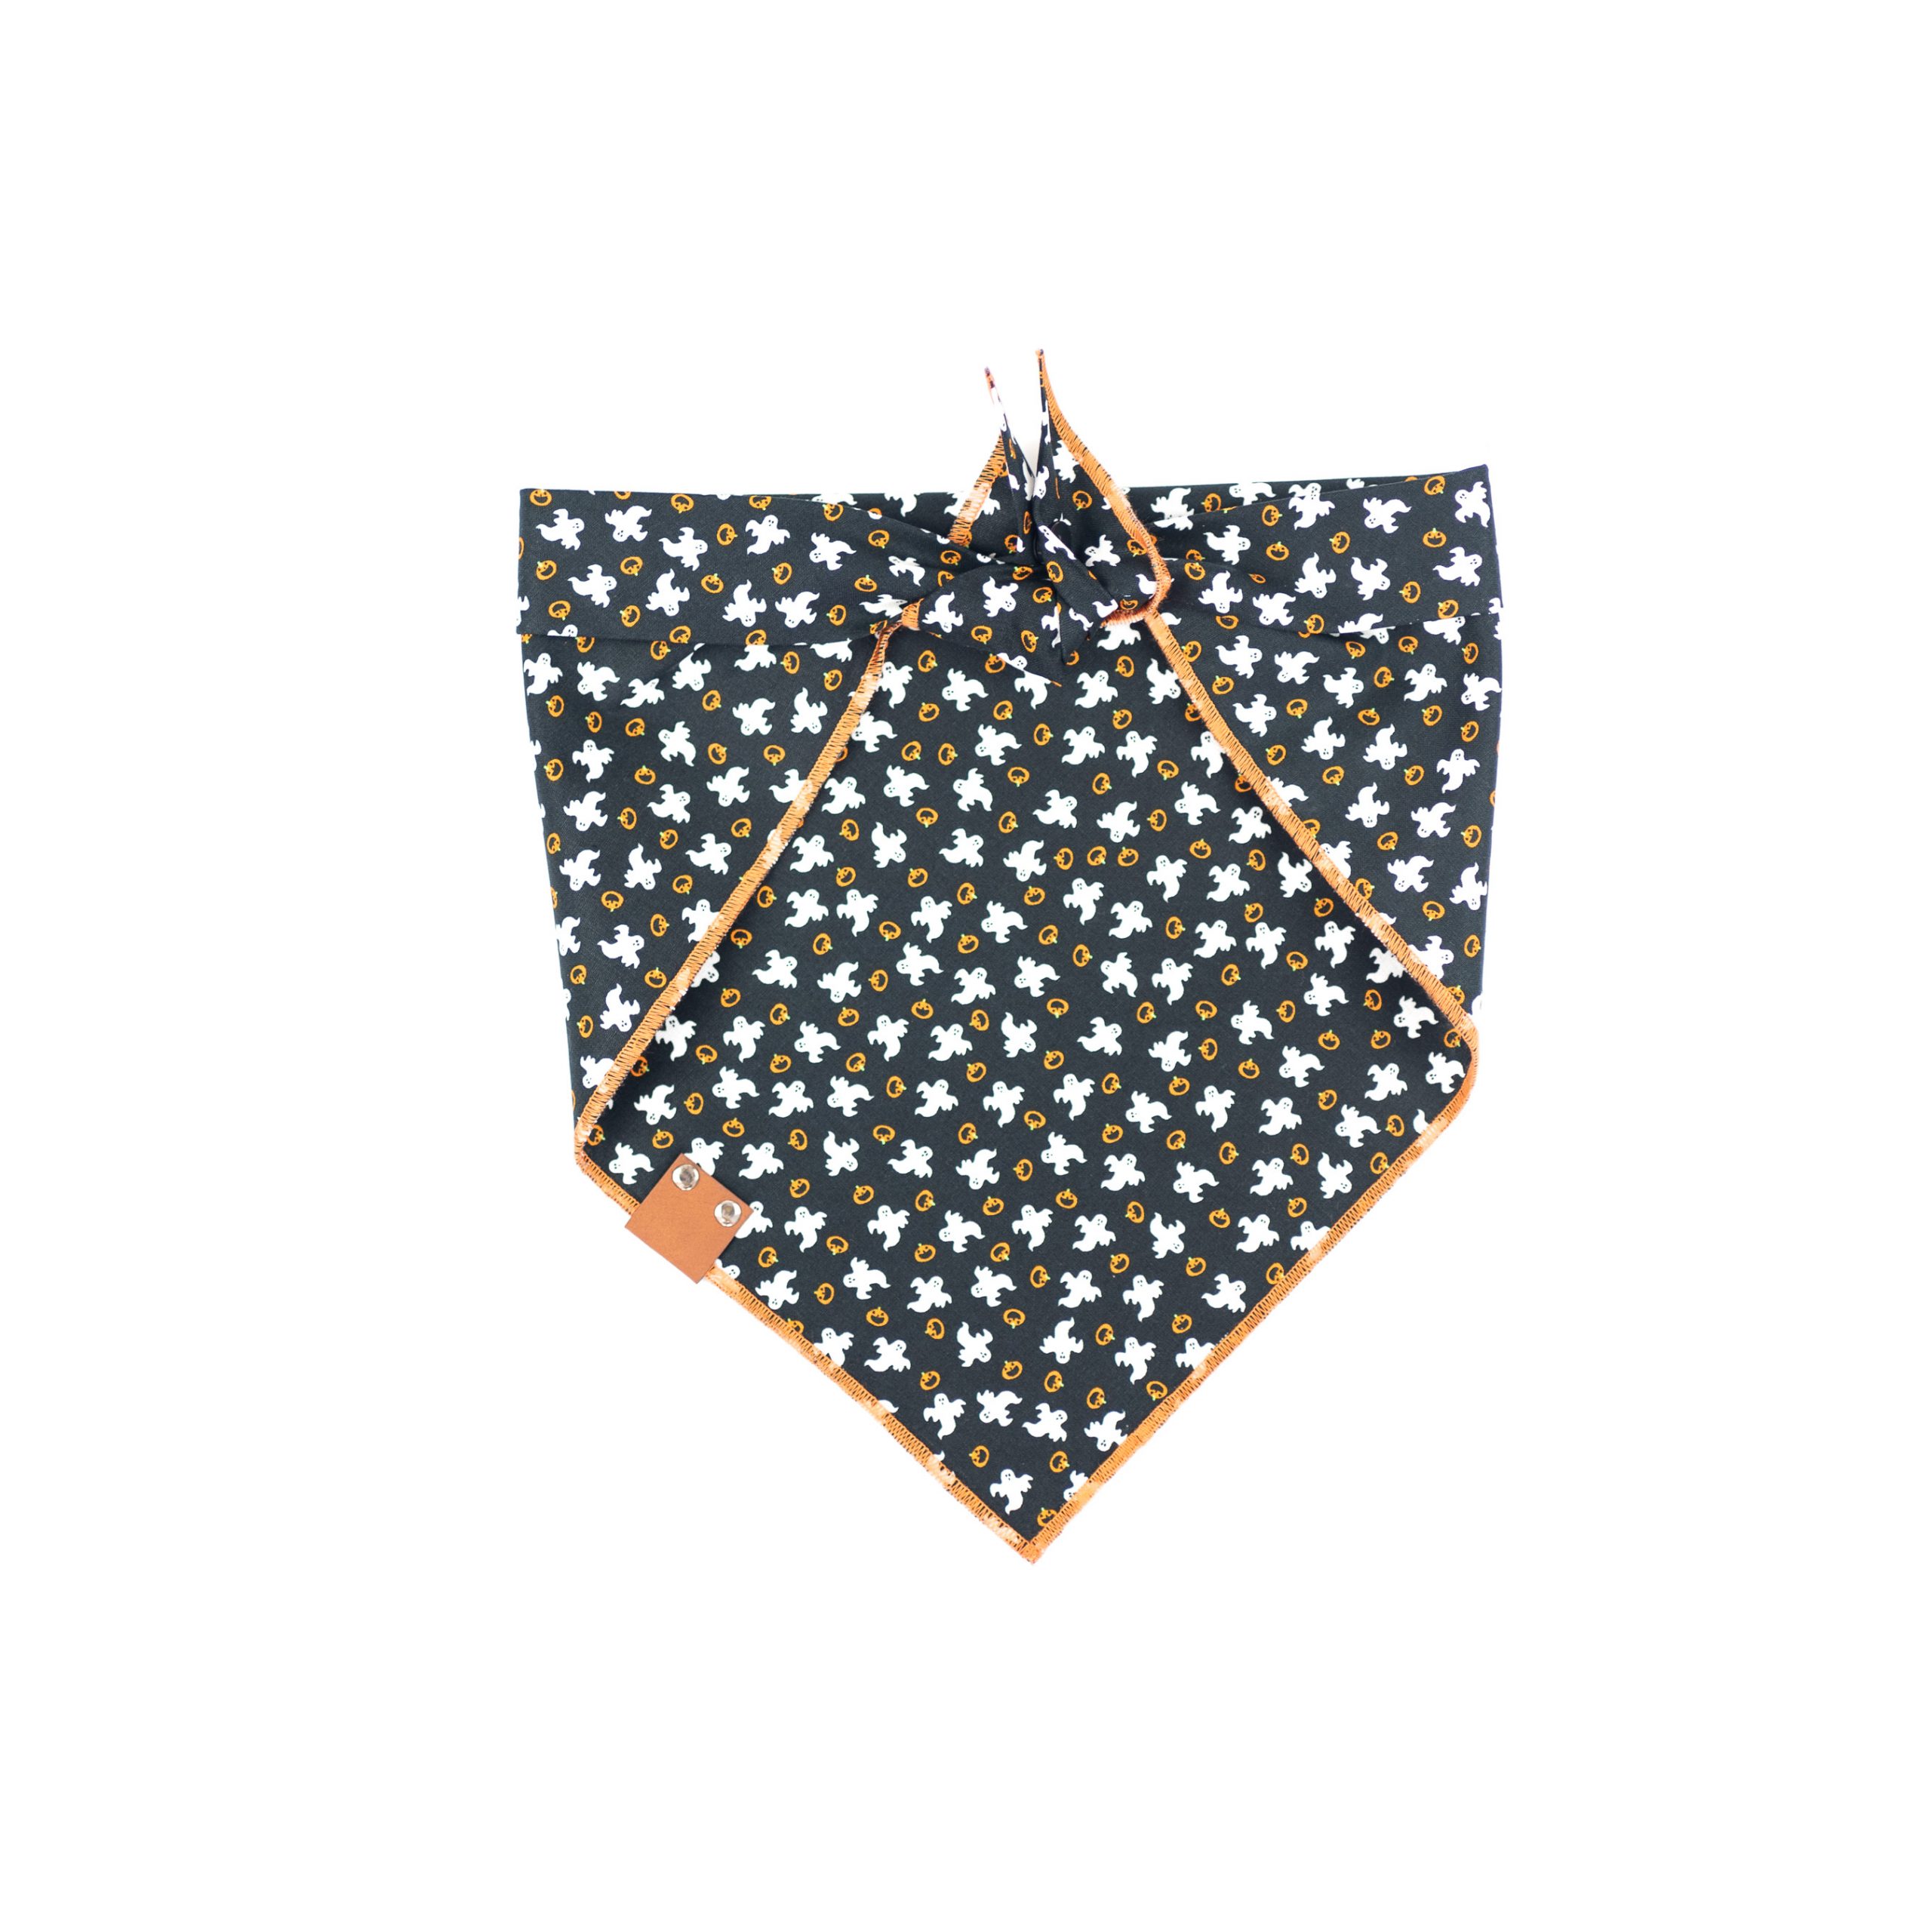 Black Dog Bandana with white ghosts and orange pumpkins for halloween